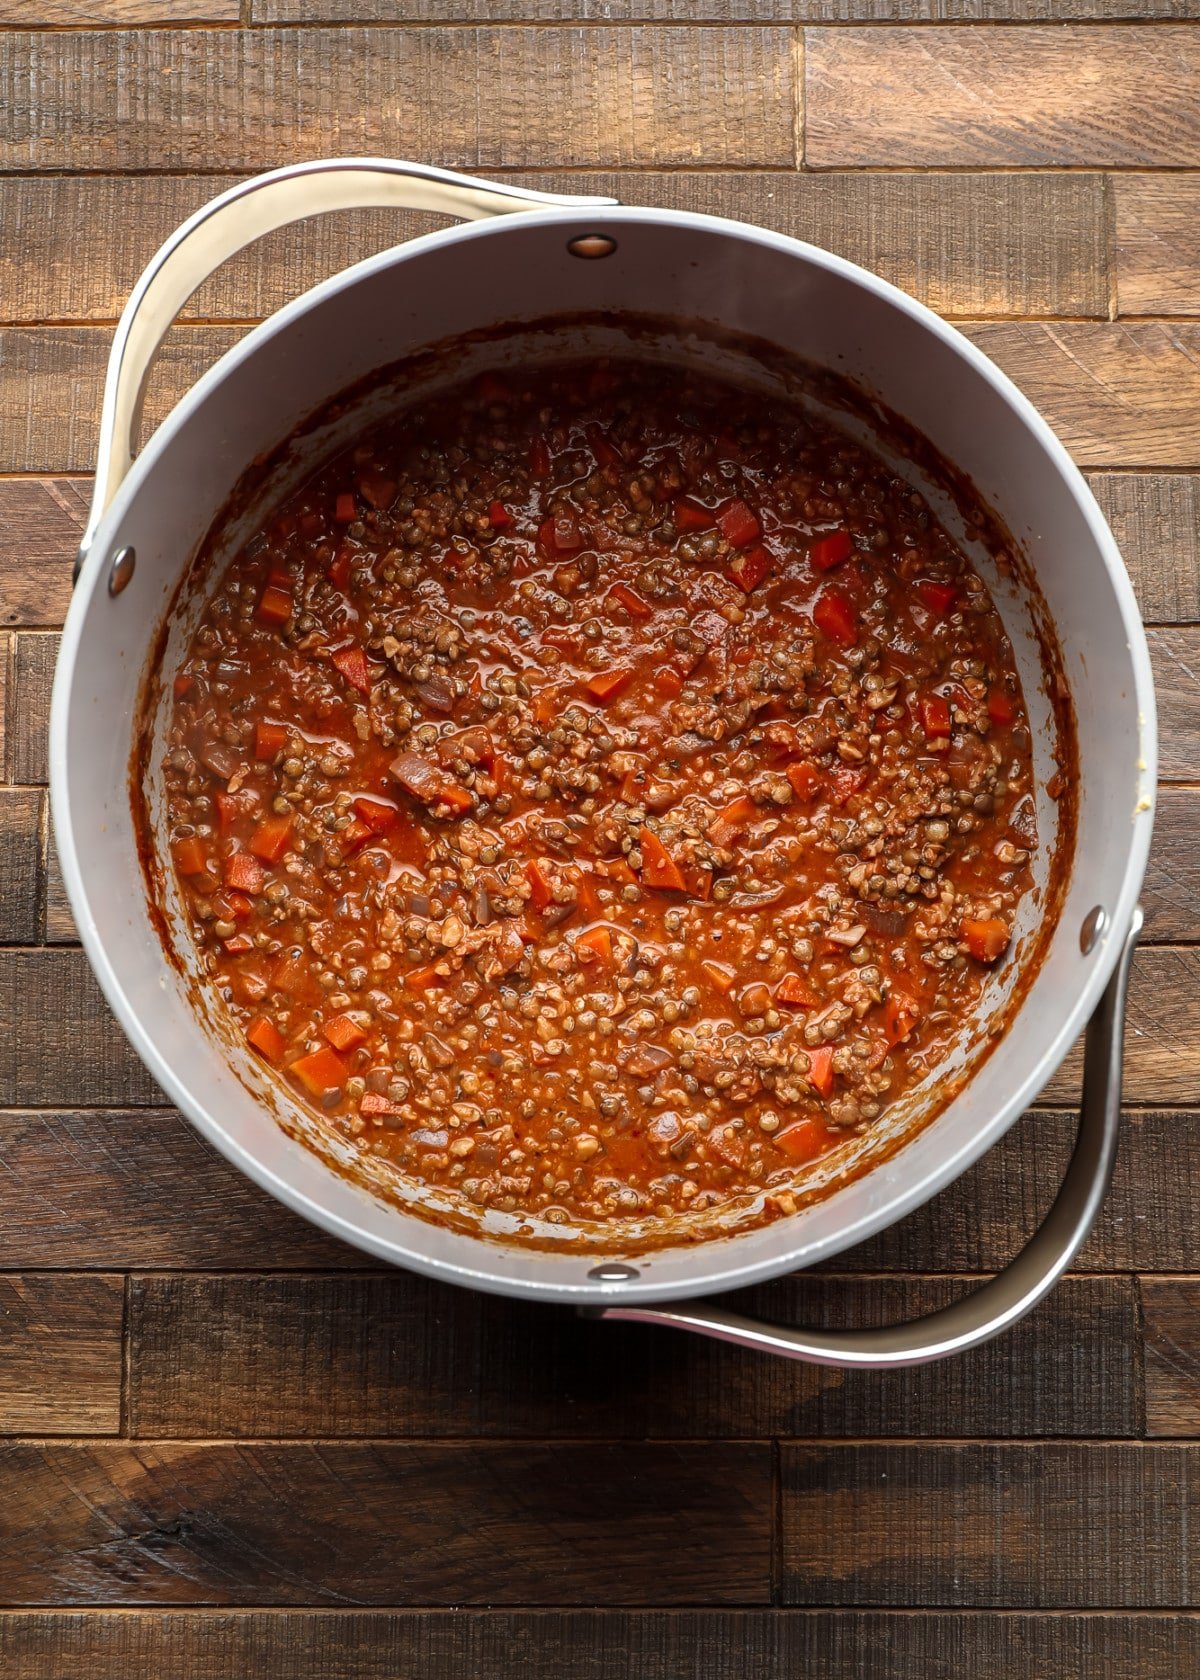 lentils and carrots in a reddish sauce in a pot